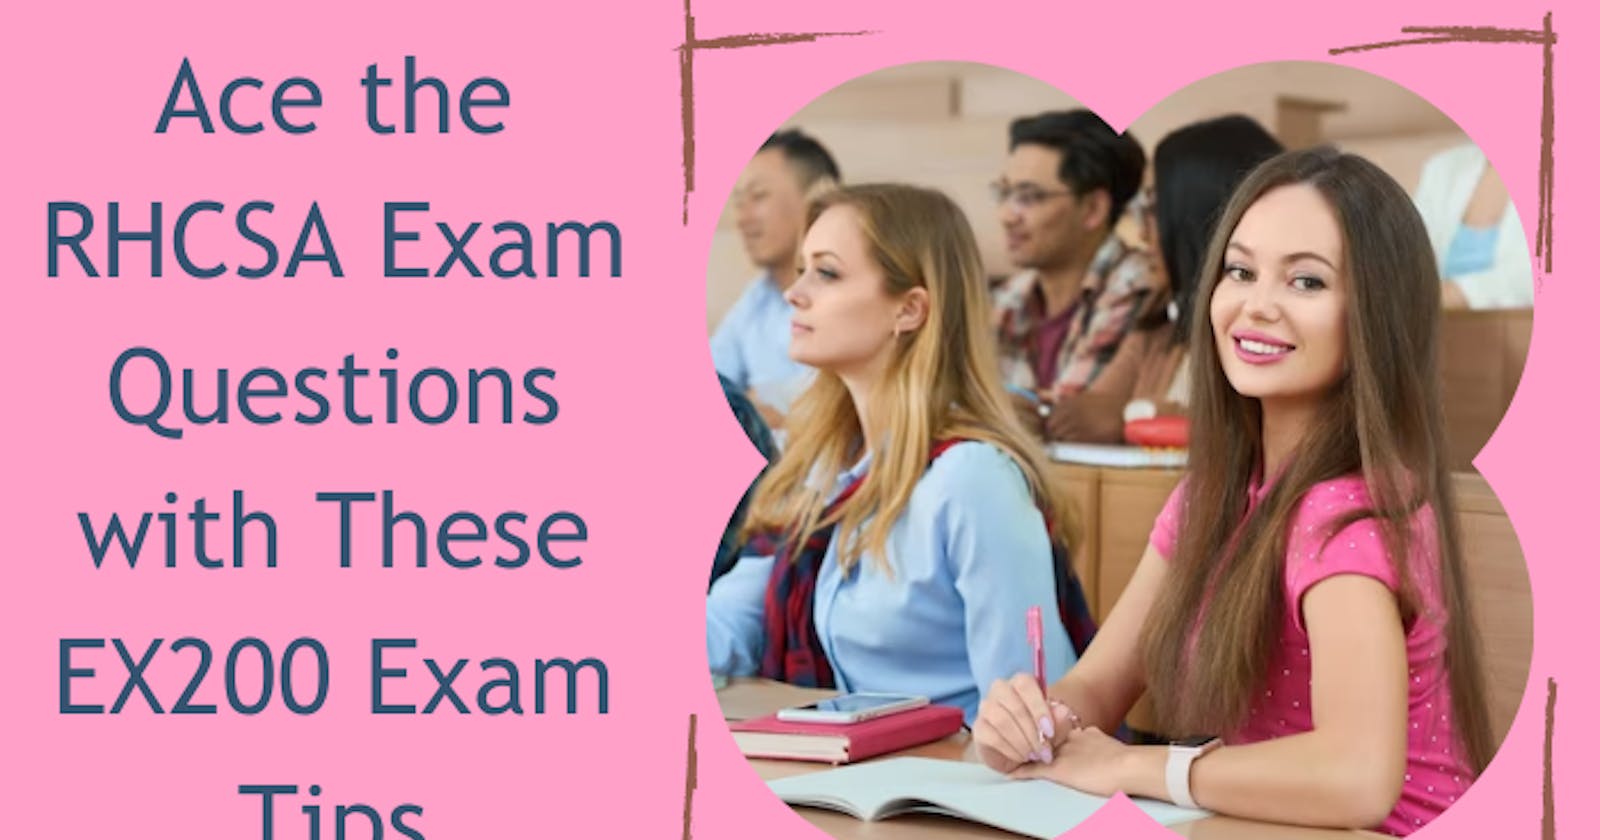 RHCSA Exam Questions: What to Expect in the EX200 Exam?